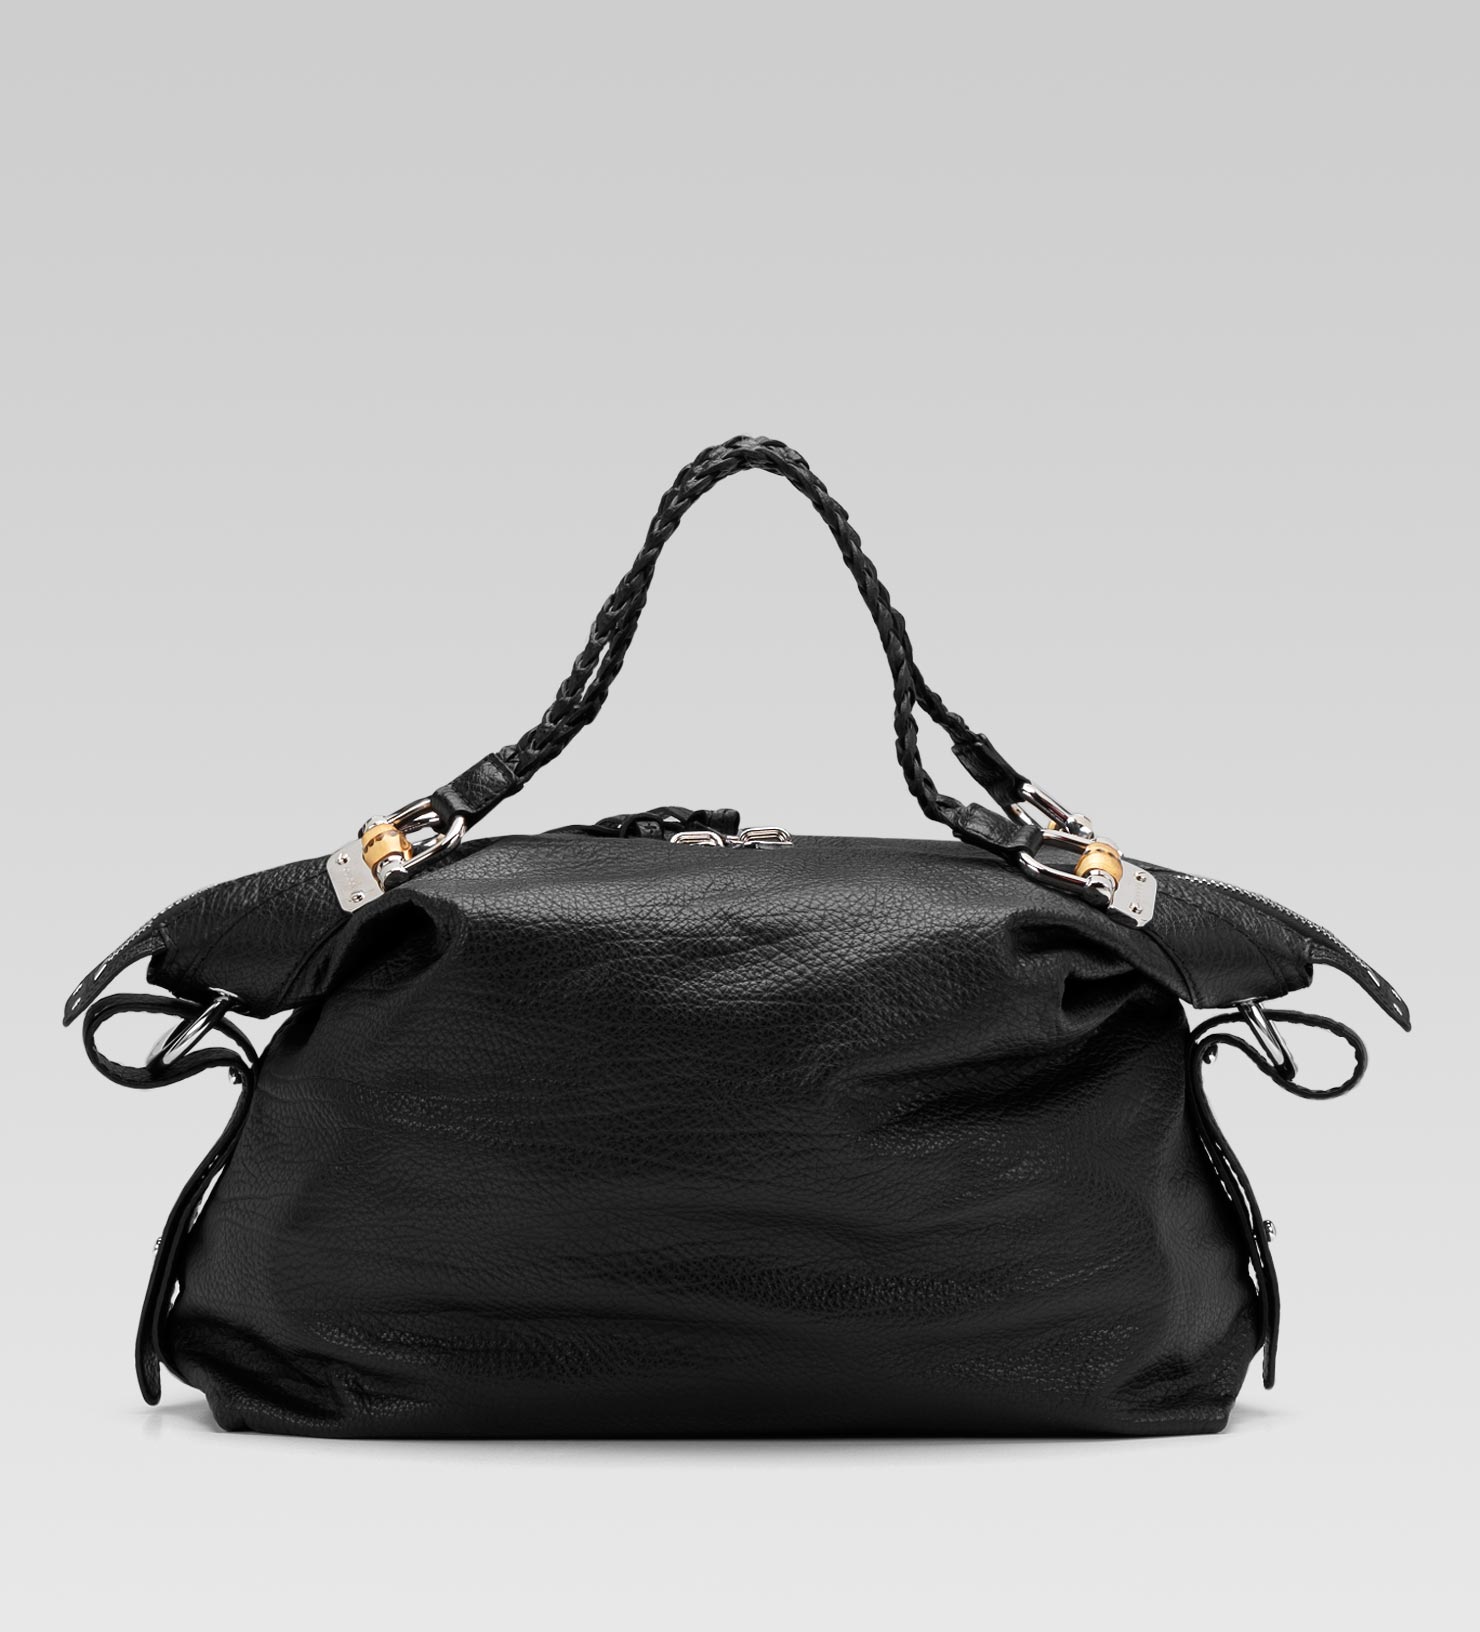 Lyst - Gucci Bamboo Bar Large Shoulder Bag with Tassels and Bamboo ...